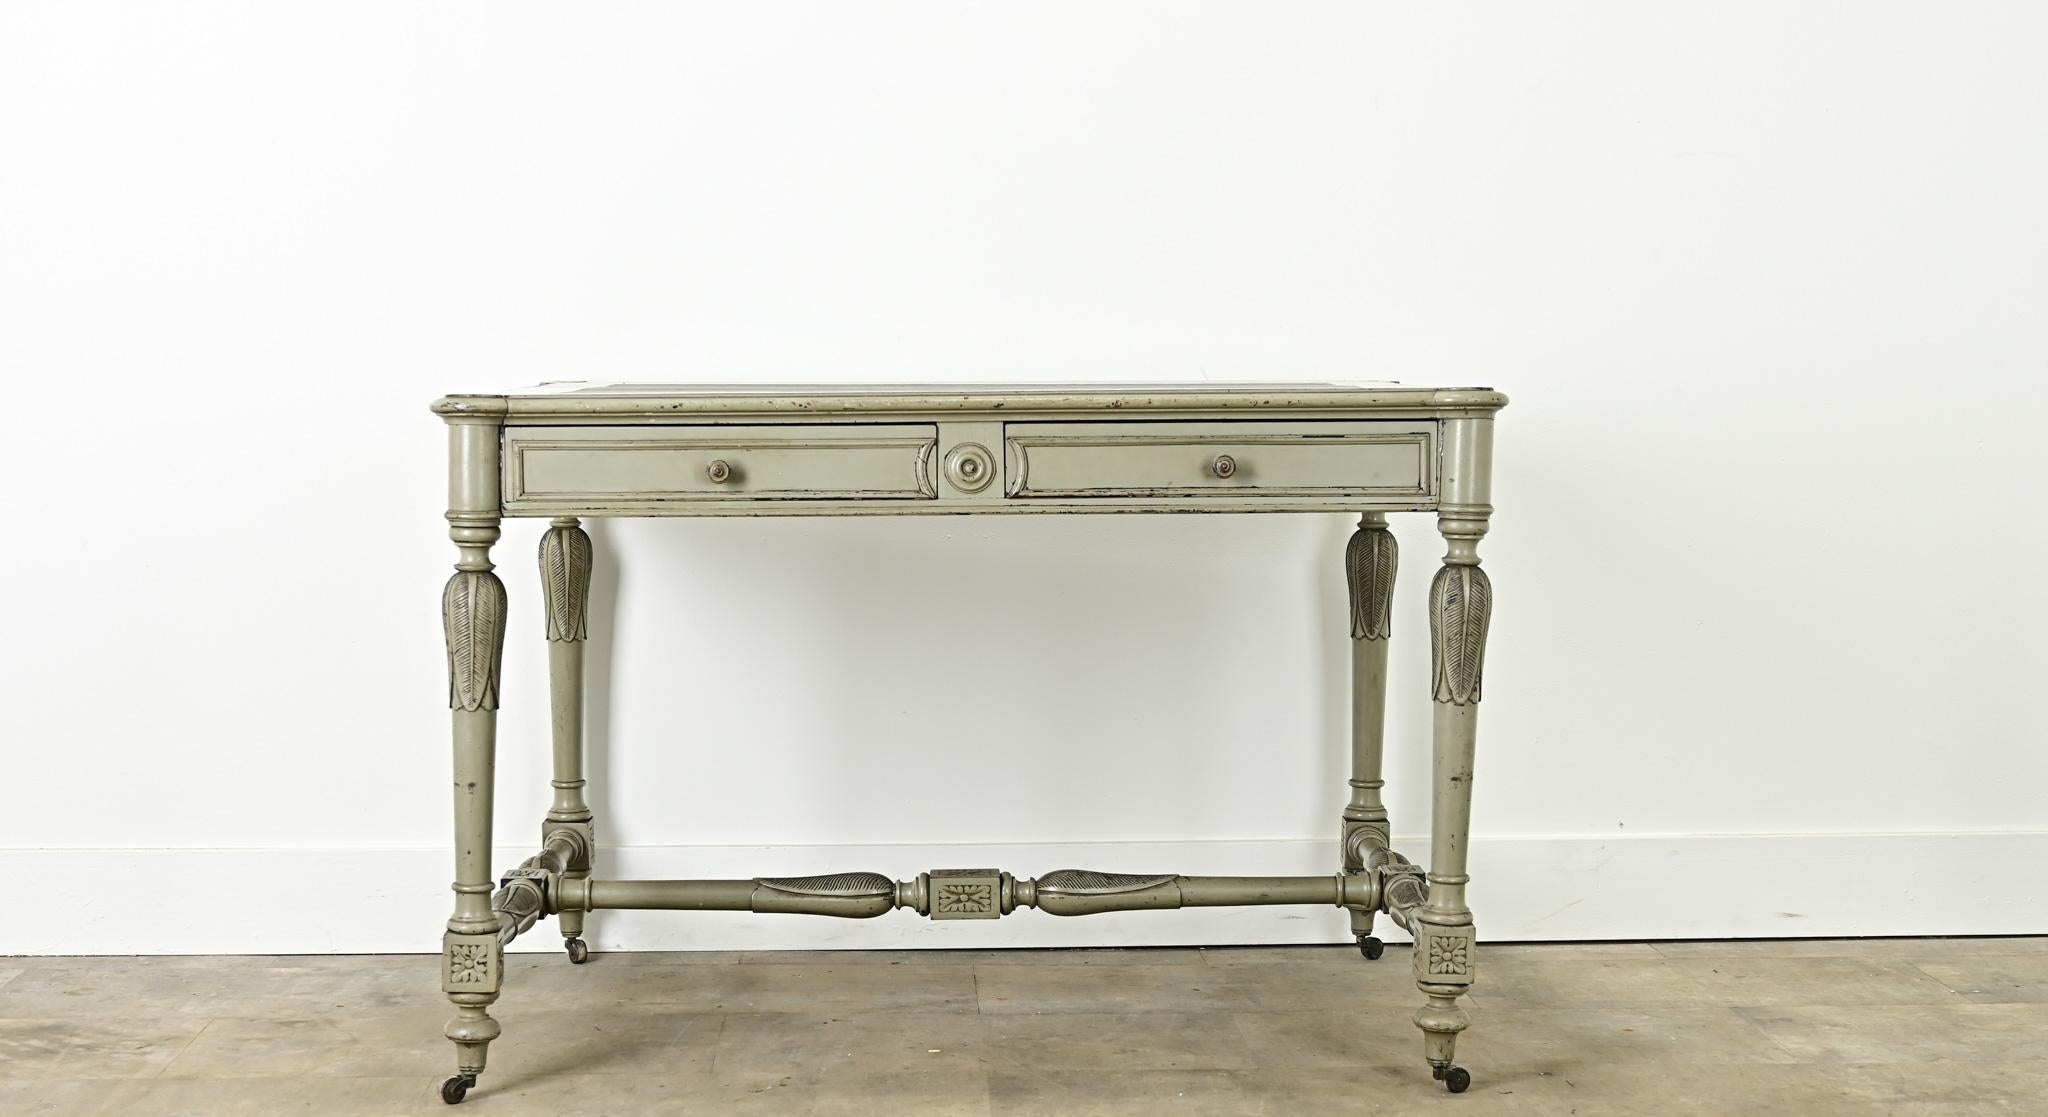 A unique Louis XVI style painted desk made in France. This painted desk has a carved wooden frame with pronounced rounded corners and a worn inset faux-leather top. Below the writing surface are two paneled drawers with turned knobs. The desk legs